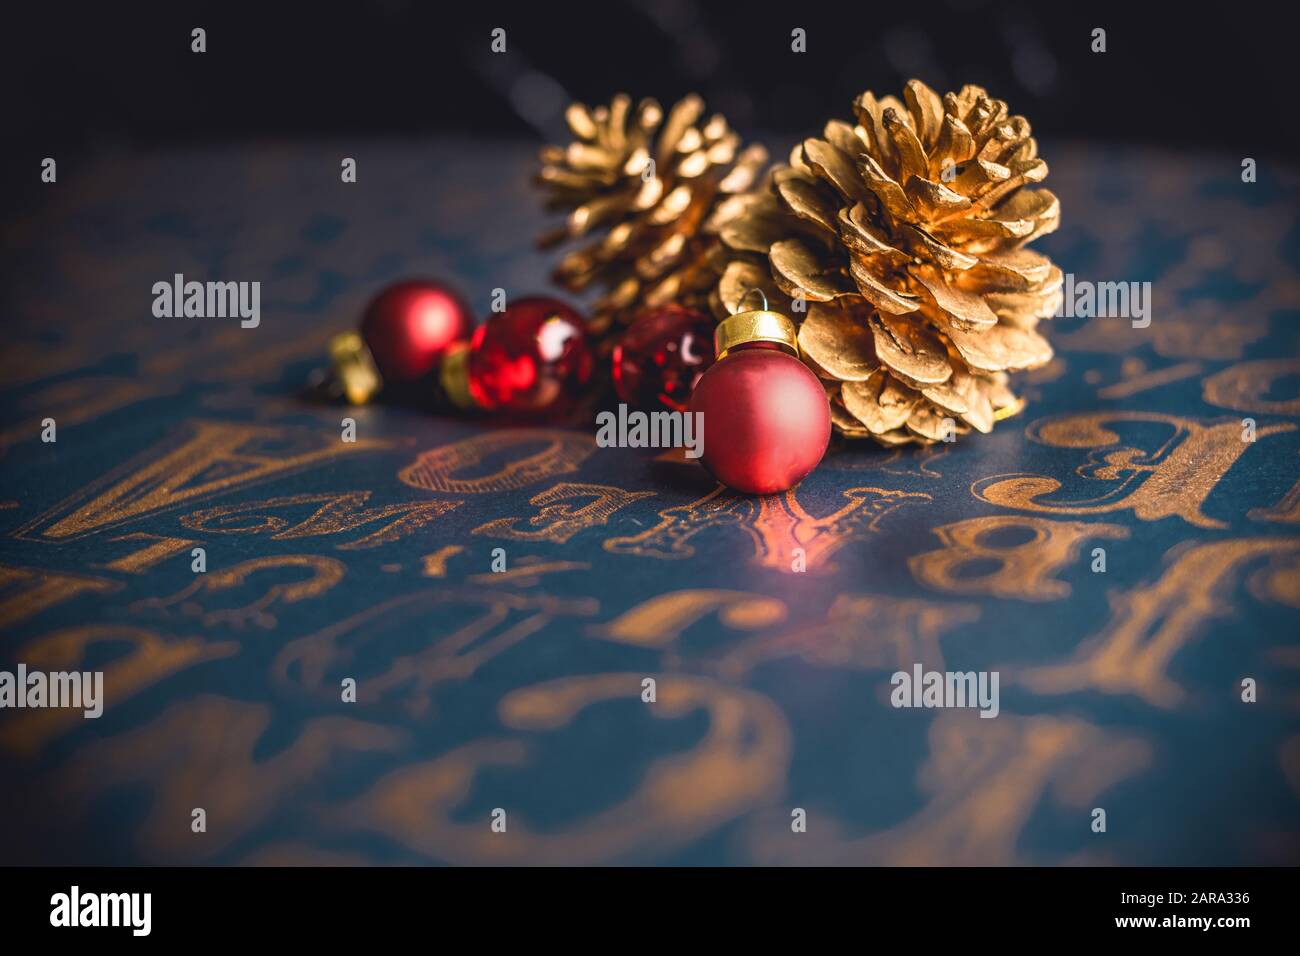 Christams gold pine conre and red glass ball decoration on vintage type pattern table background.holiday greeting card with copy space Stock Photo